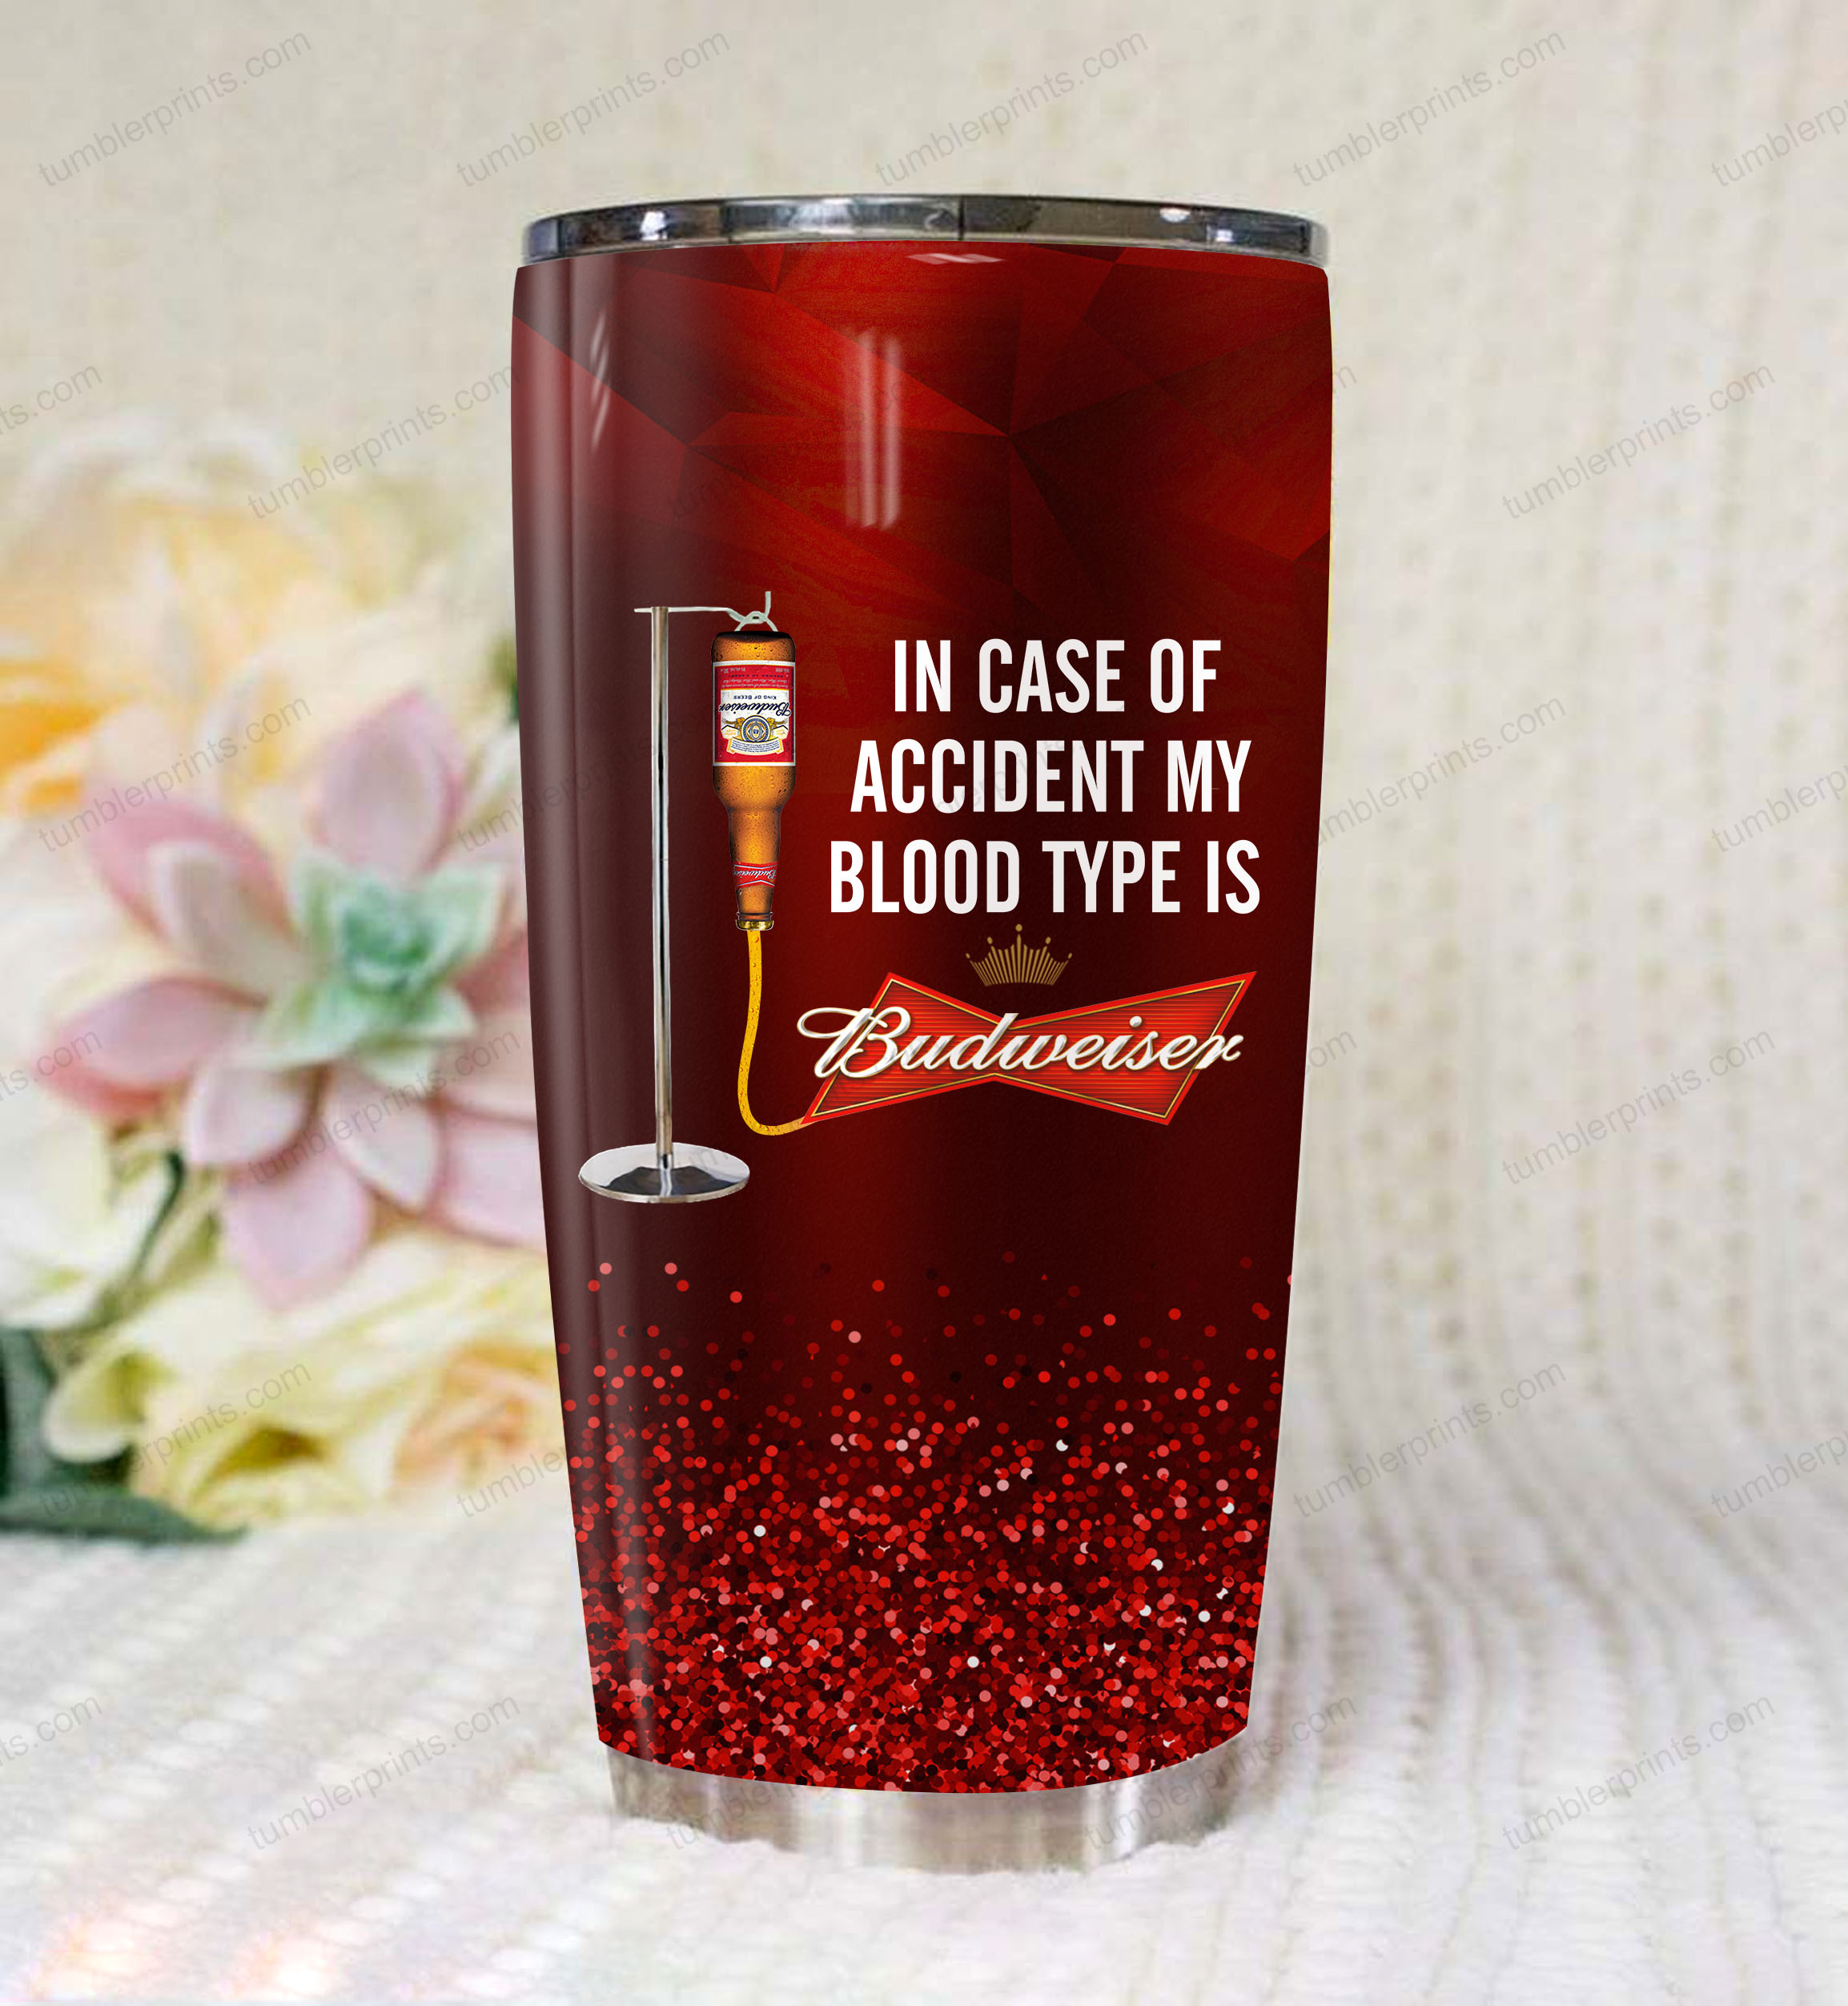 In case of an accident my blood type is budweiser full printing tumbler – maria